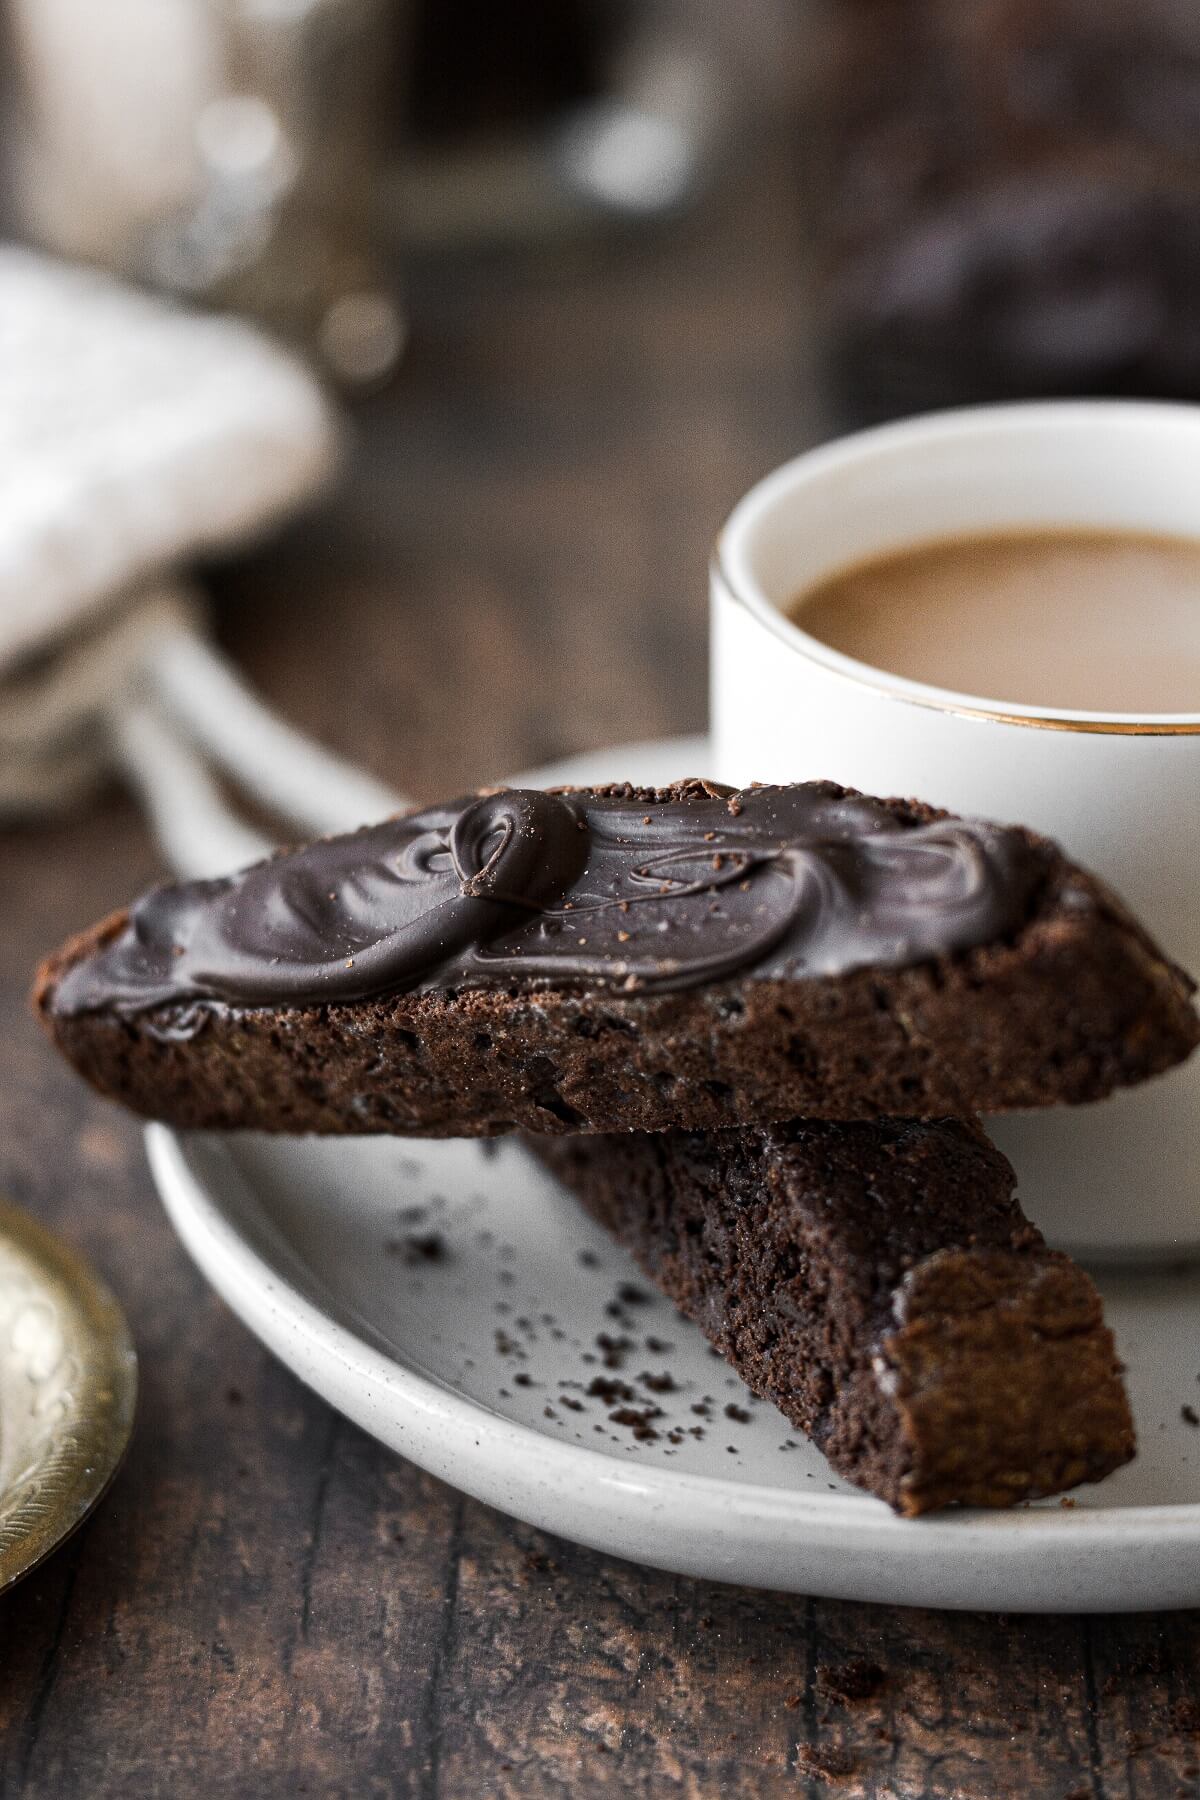 Two chocolate biscotti on a plate with a cup of coffee.